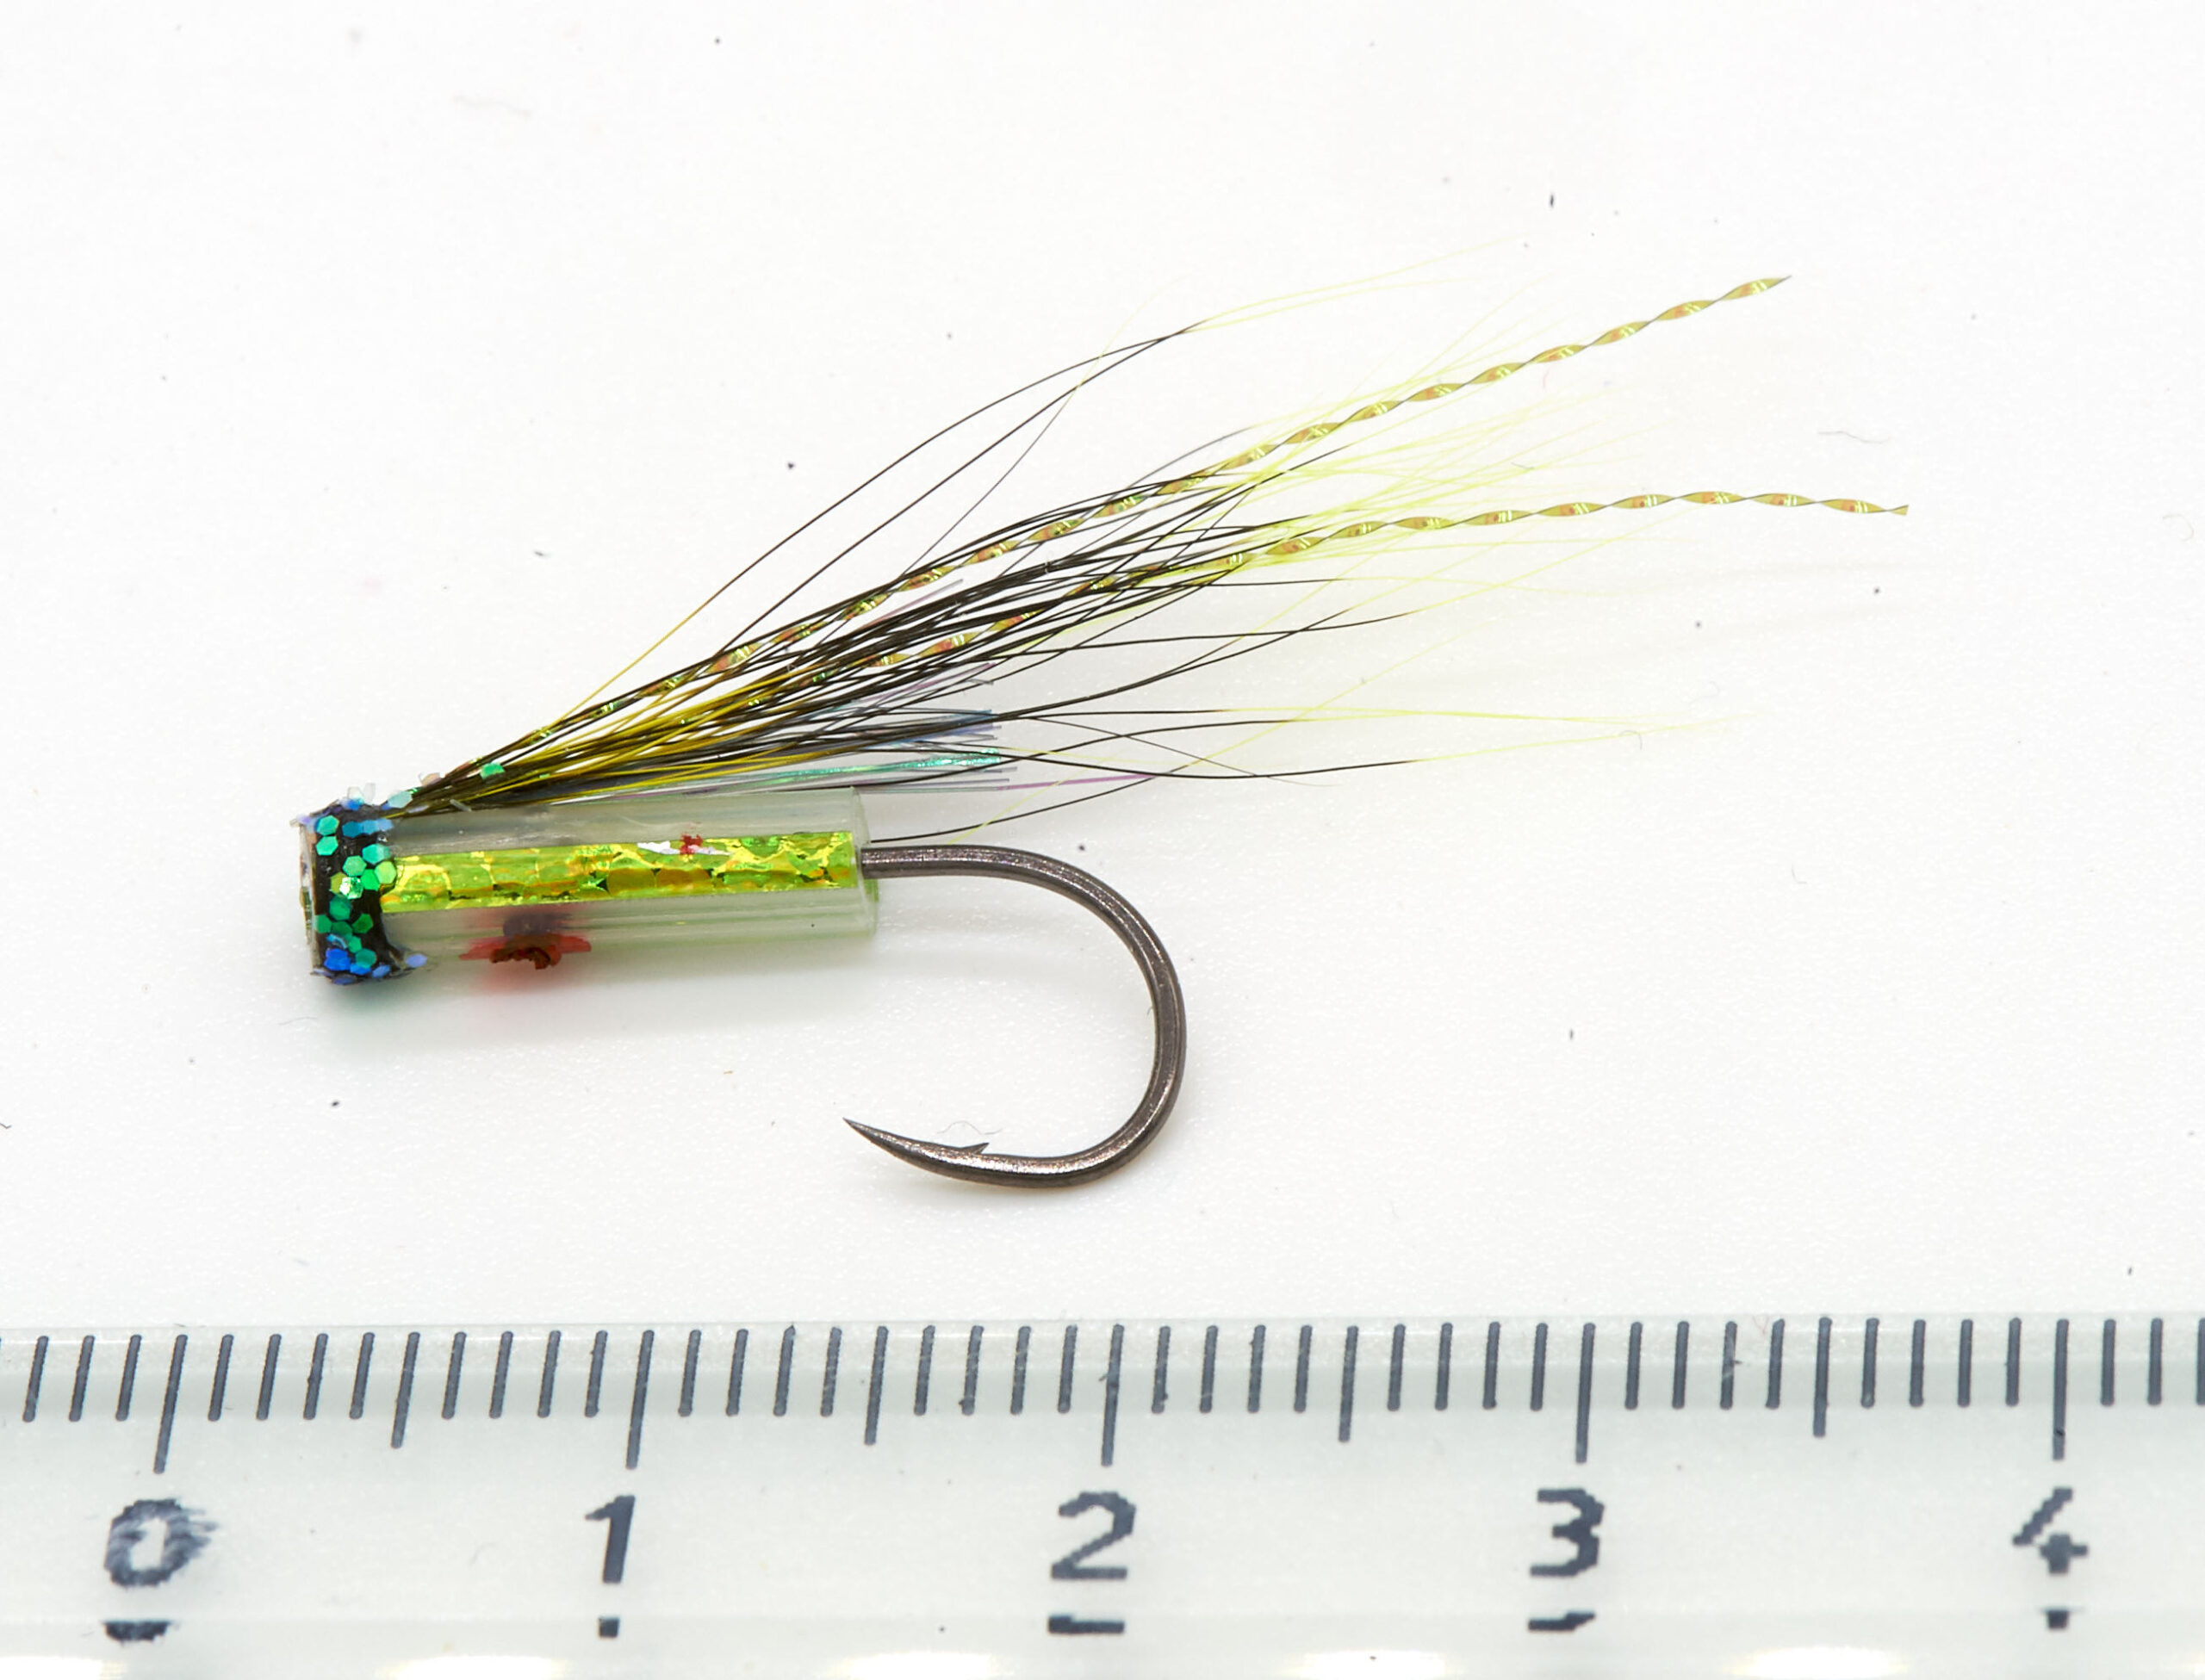 Newsletter 2019 Iridescent hitch fly, Tiny hitch flies